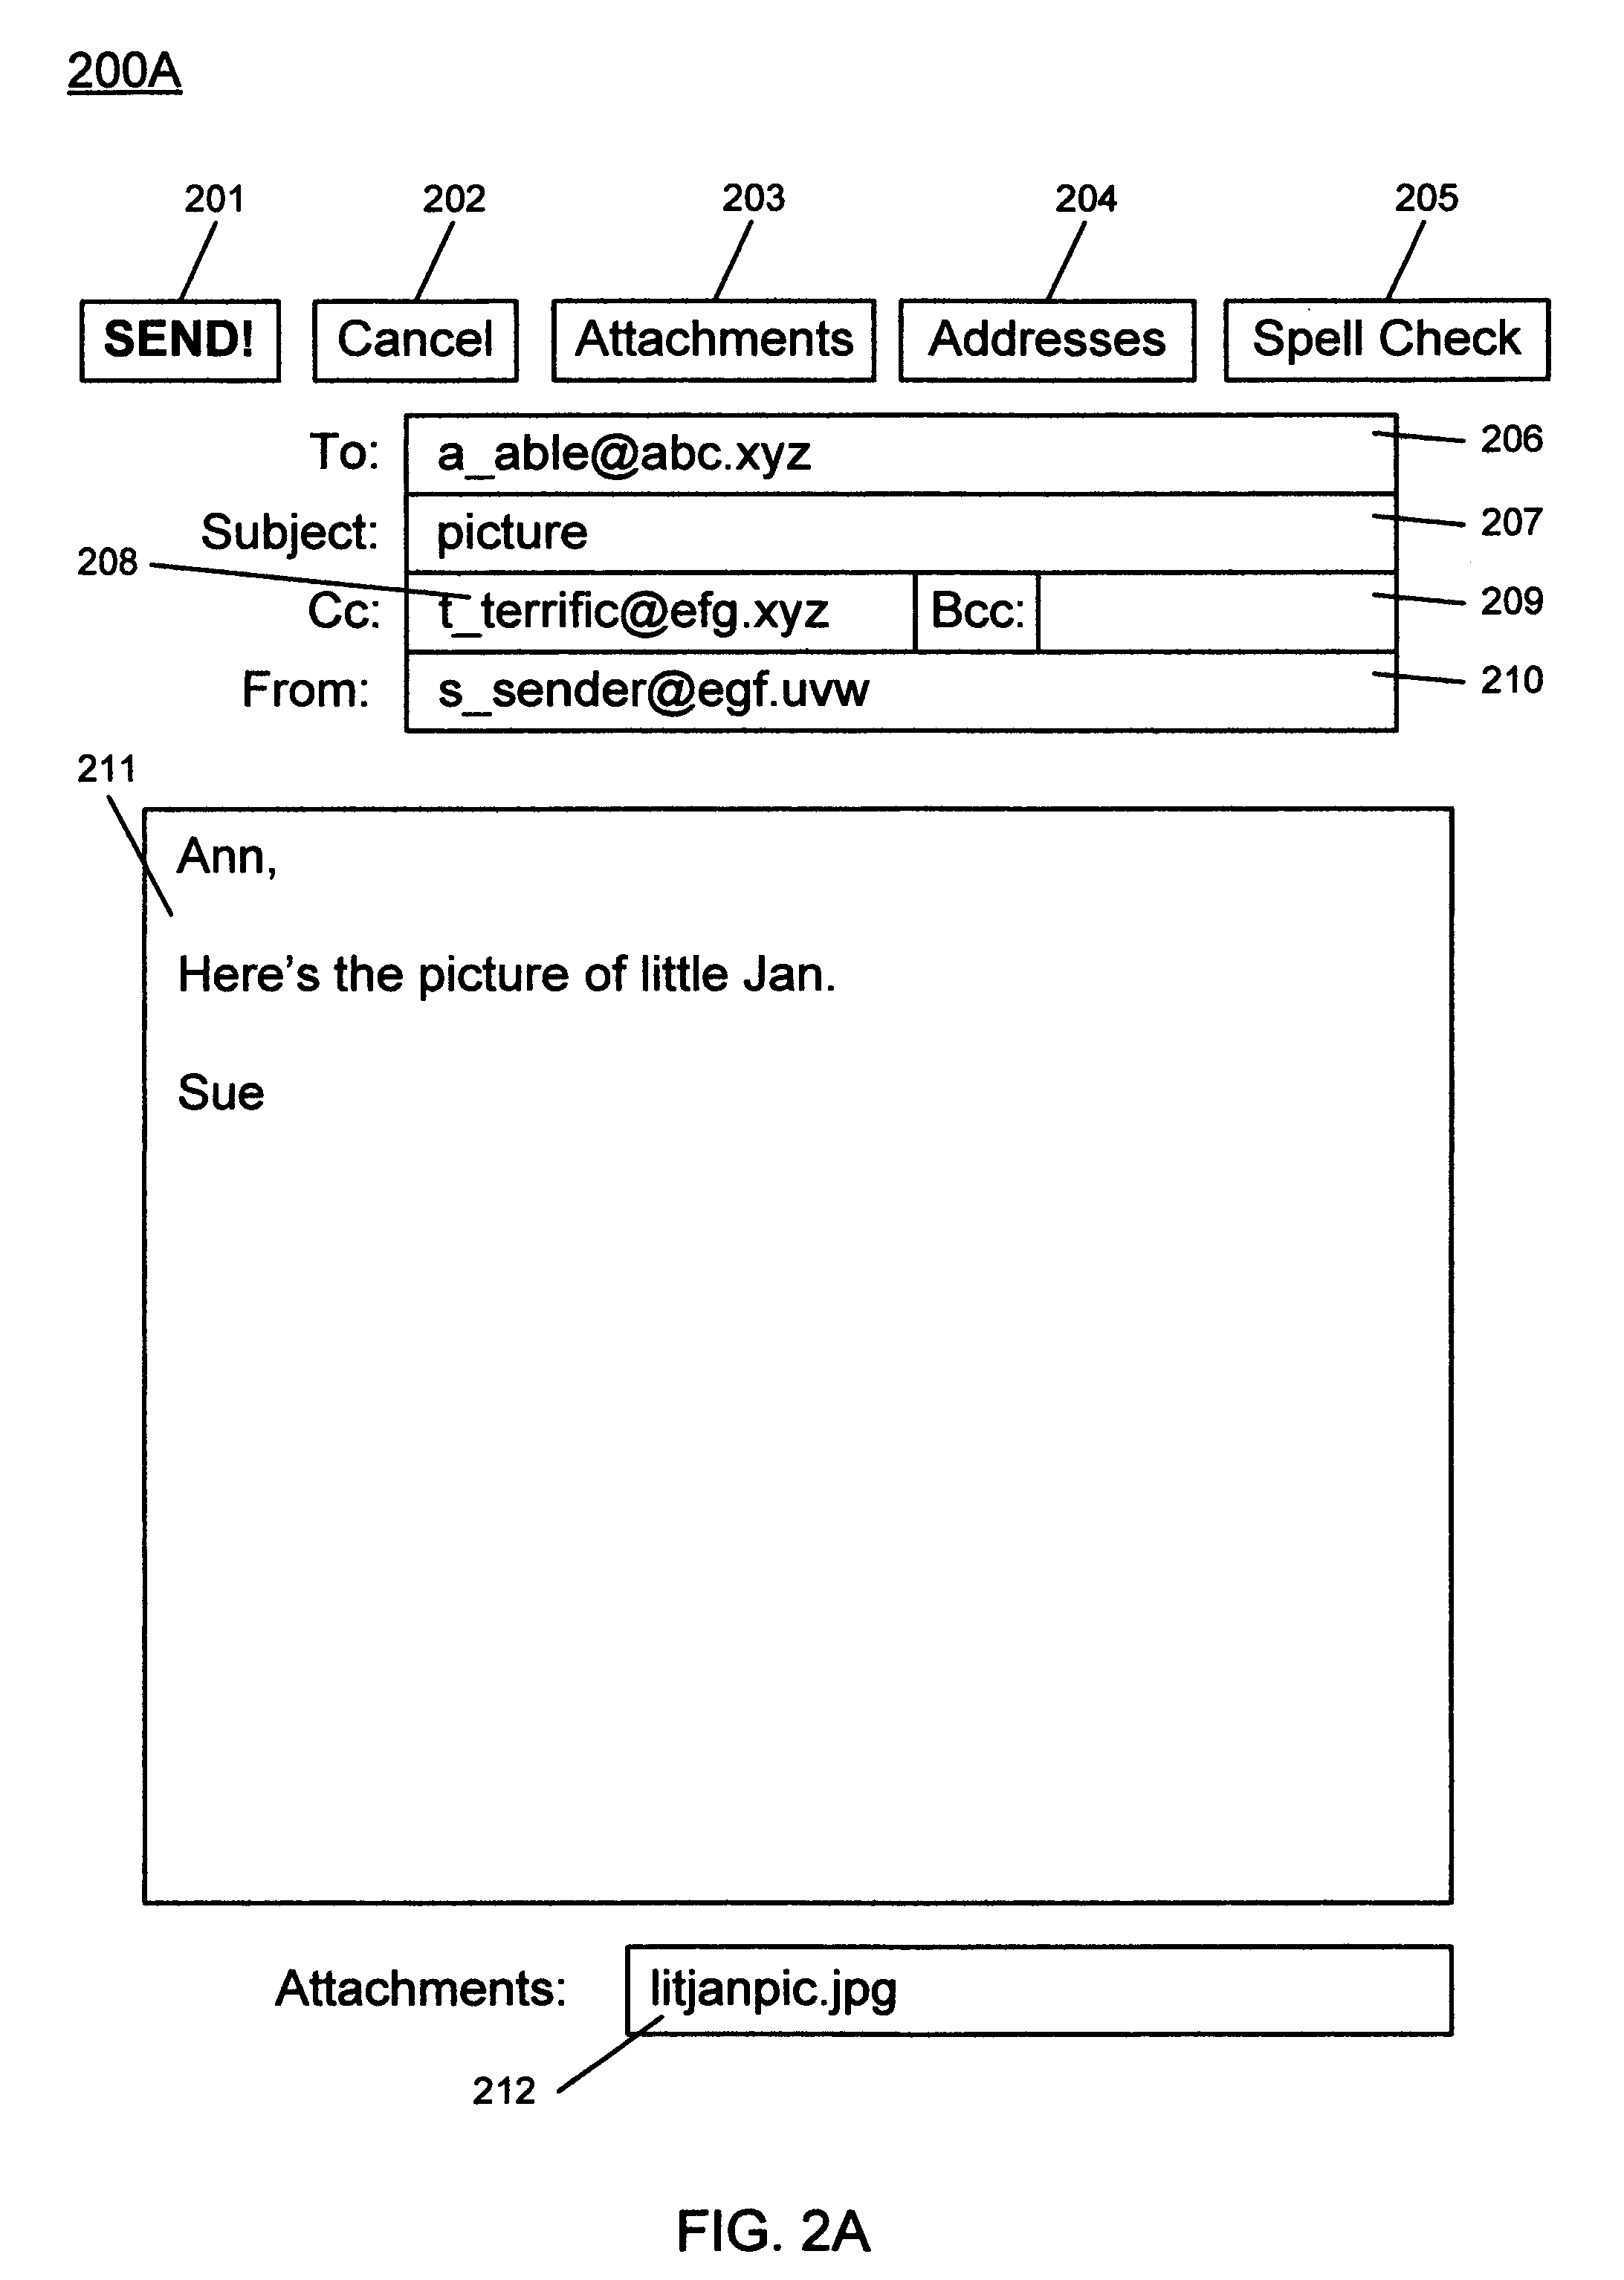 Method of email attachment confirmation